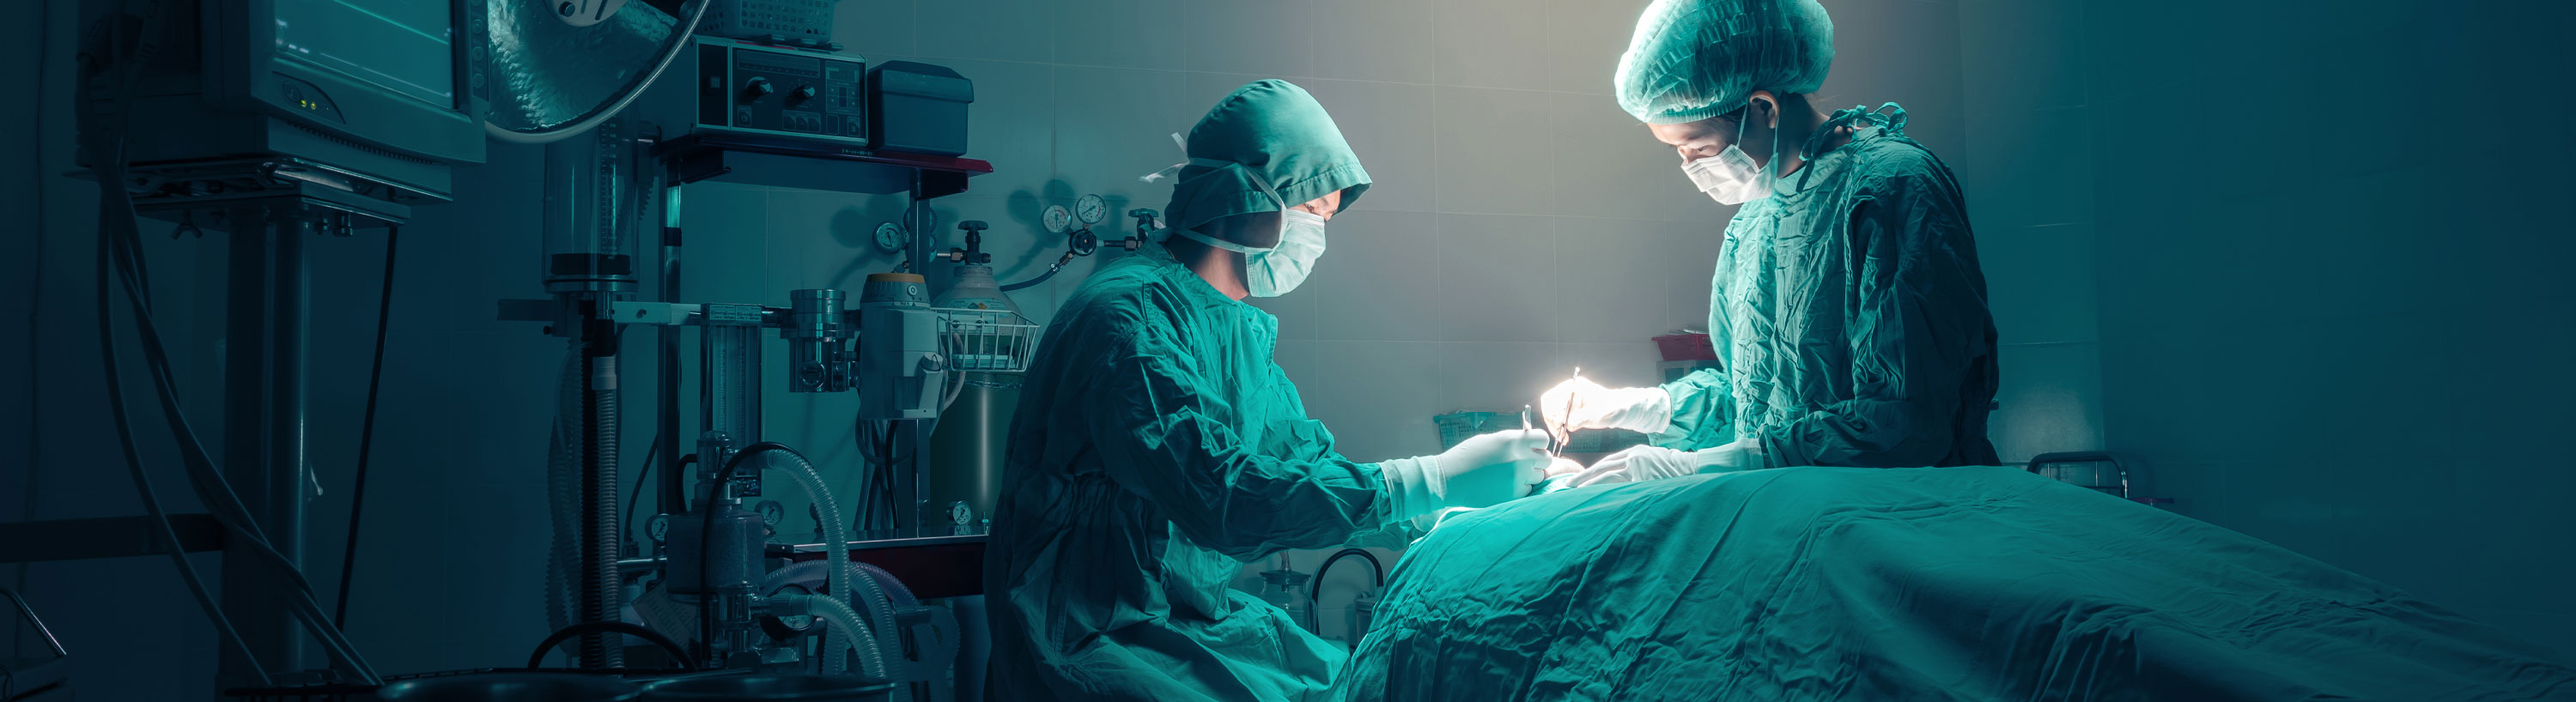 Banner picture of two surgeon's wearing medical covers over their clothes, gloves, mask, and head cap on. They are in an operation room performing surgery on a patient.